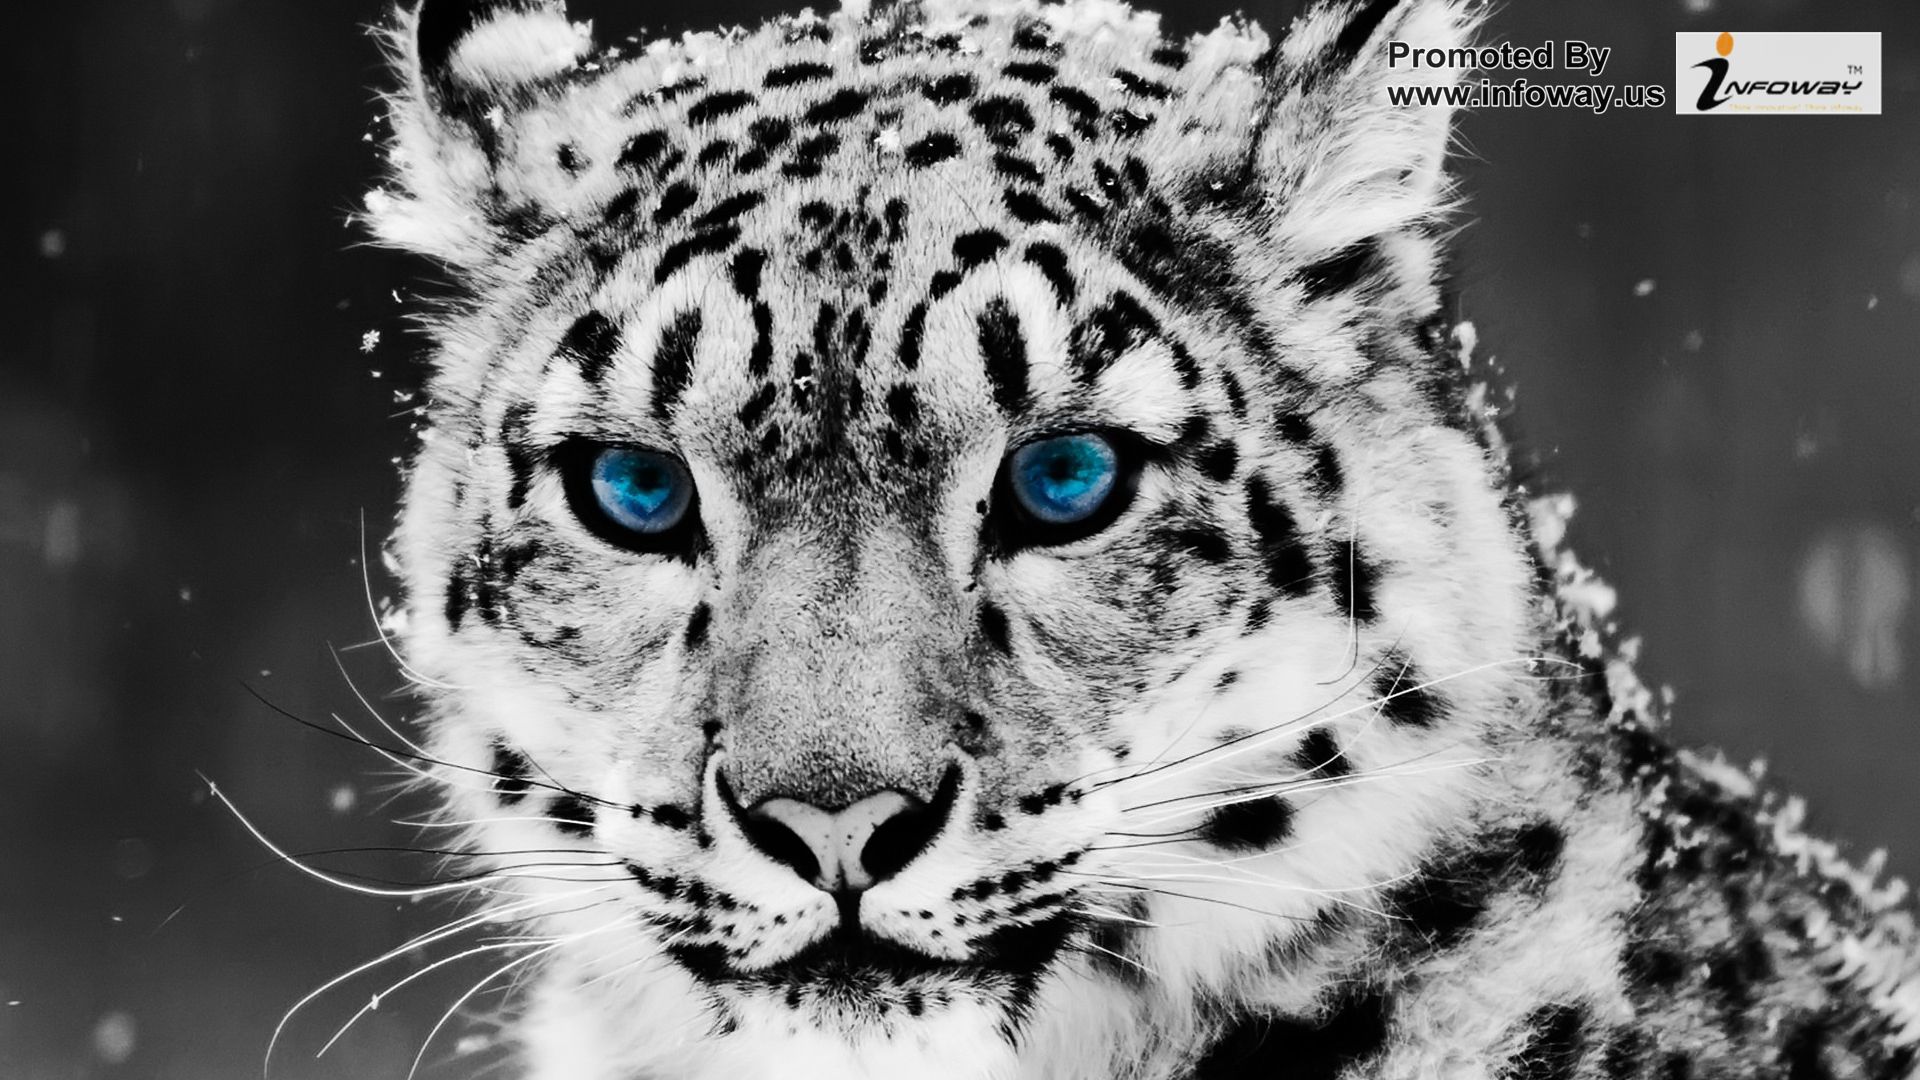 white tiger wallpaper cubs face marvel baby tigers in snow bengal